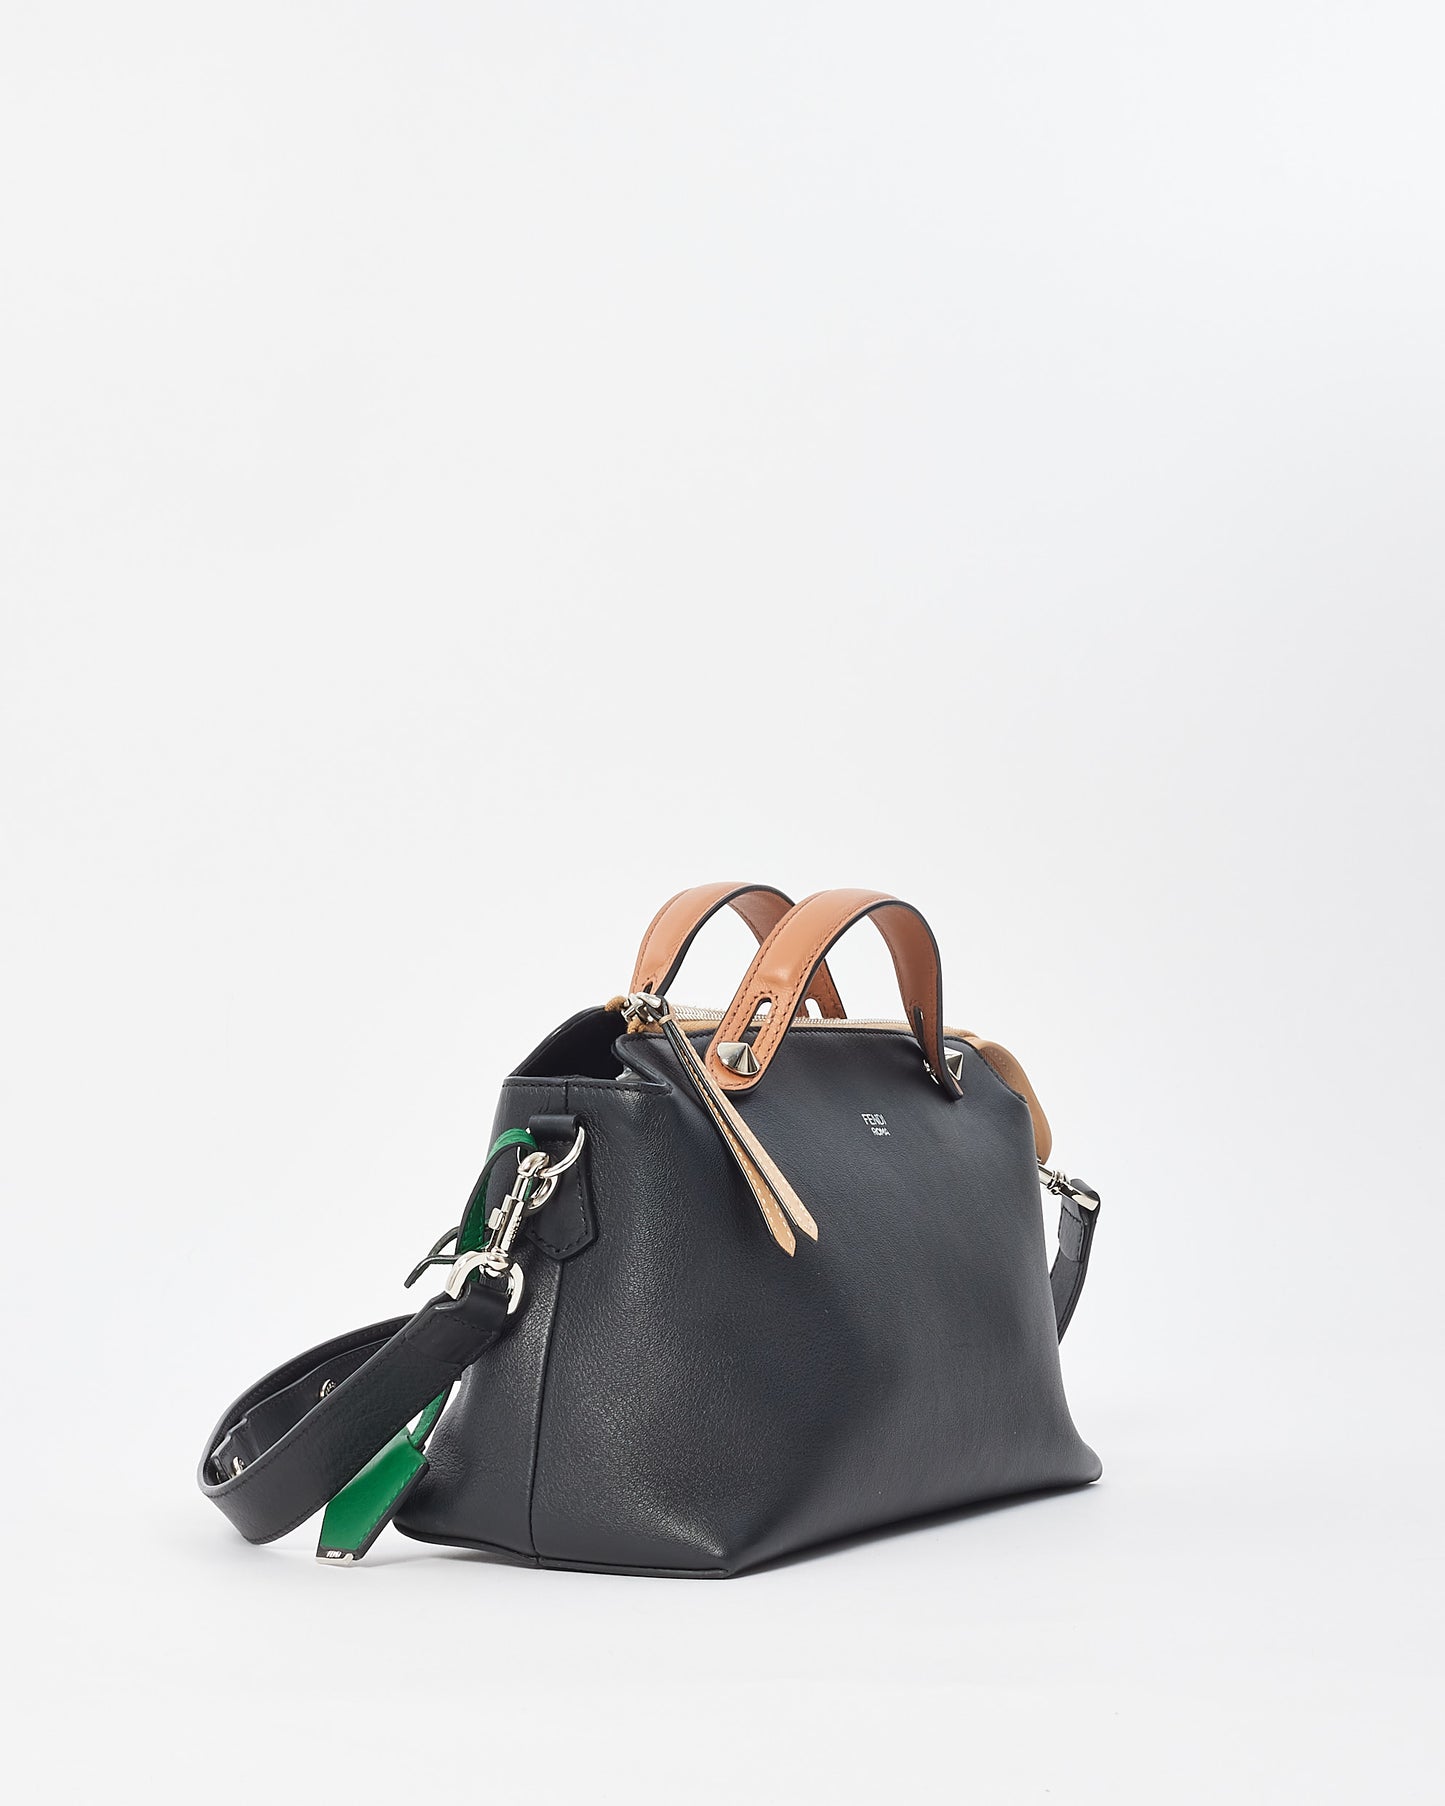 Fendi Black Green & Brown Leather "By The Way" Bowling Bag